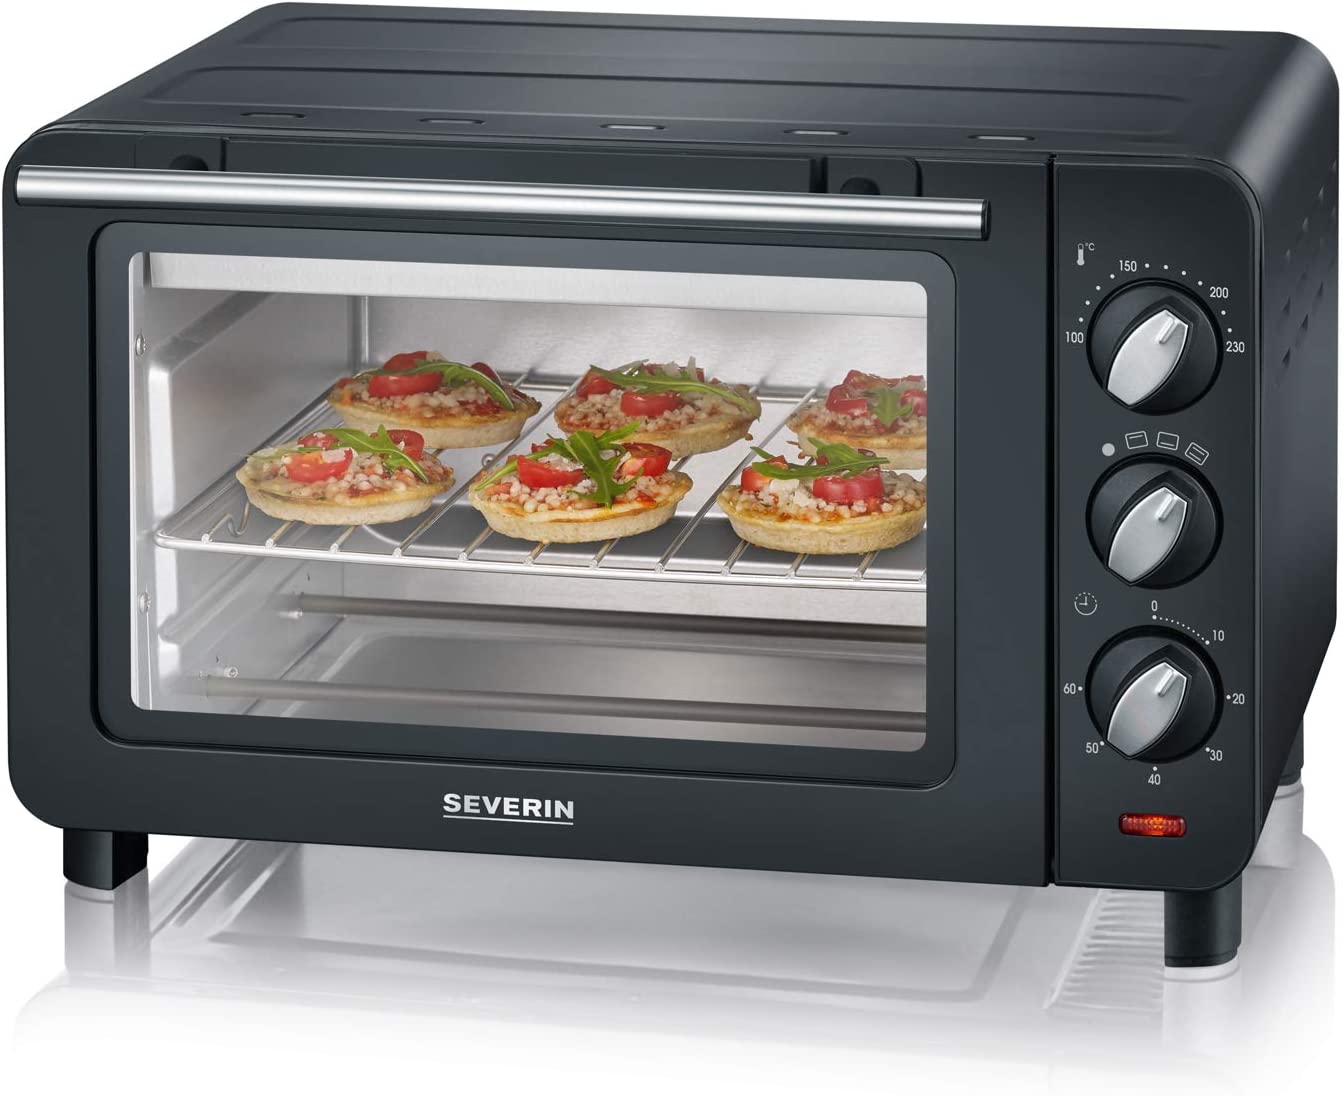 Severin - Toast oven 1200 watts, temperature between 100 and 230 ° C, 14 Litres, timer, grill and oven, black to 2042